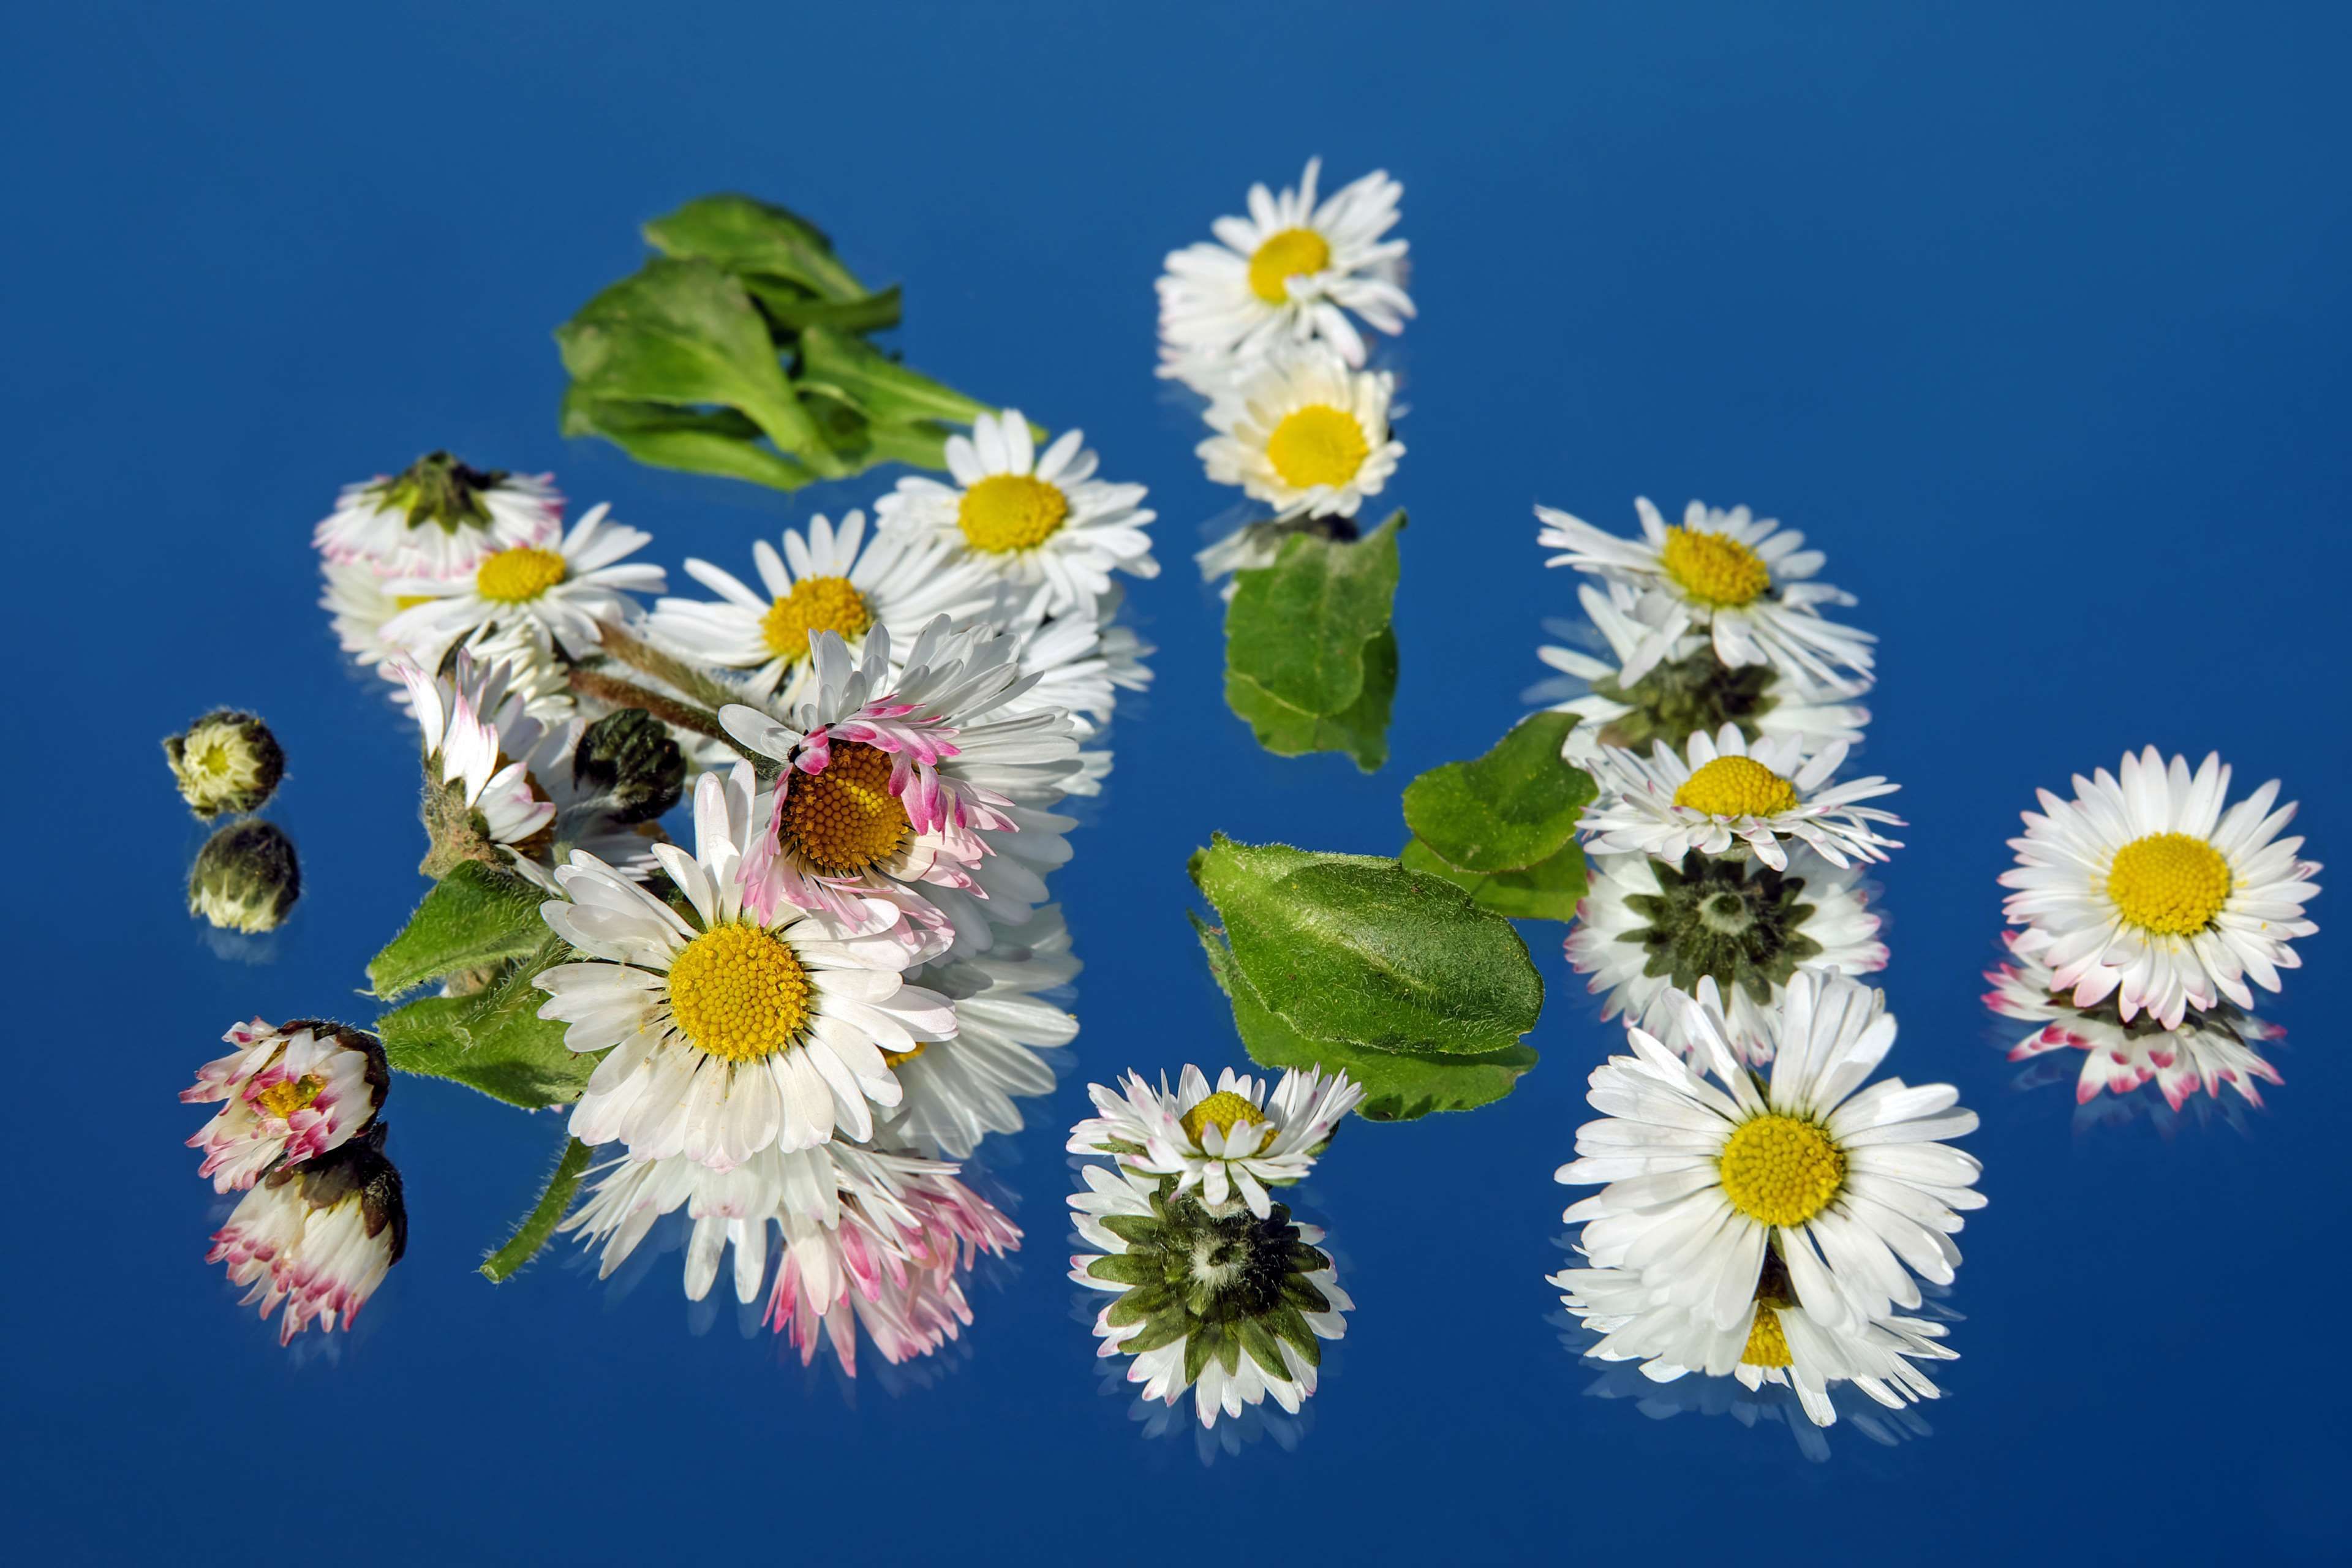 bloom #blossom #composites #cure #daisy #flower #flowers #fodder ...